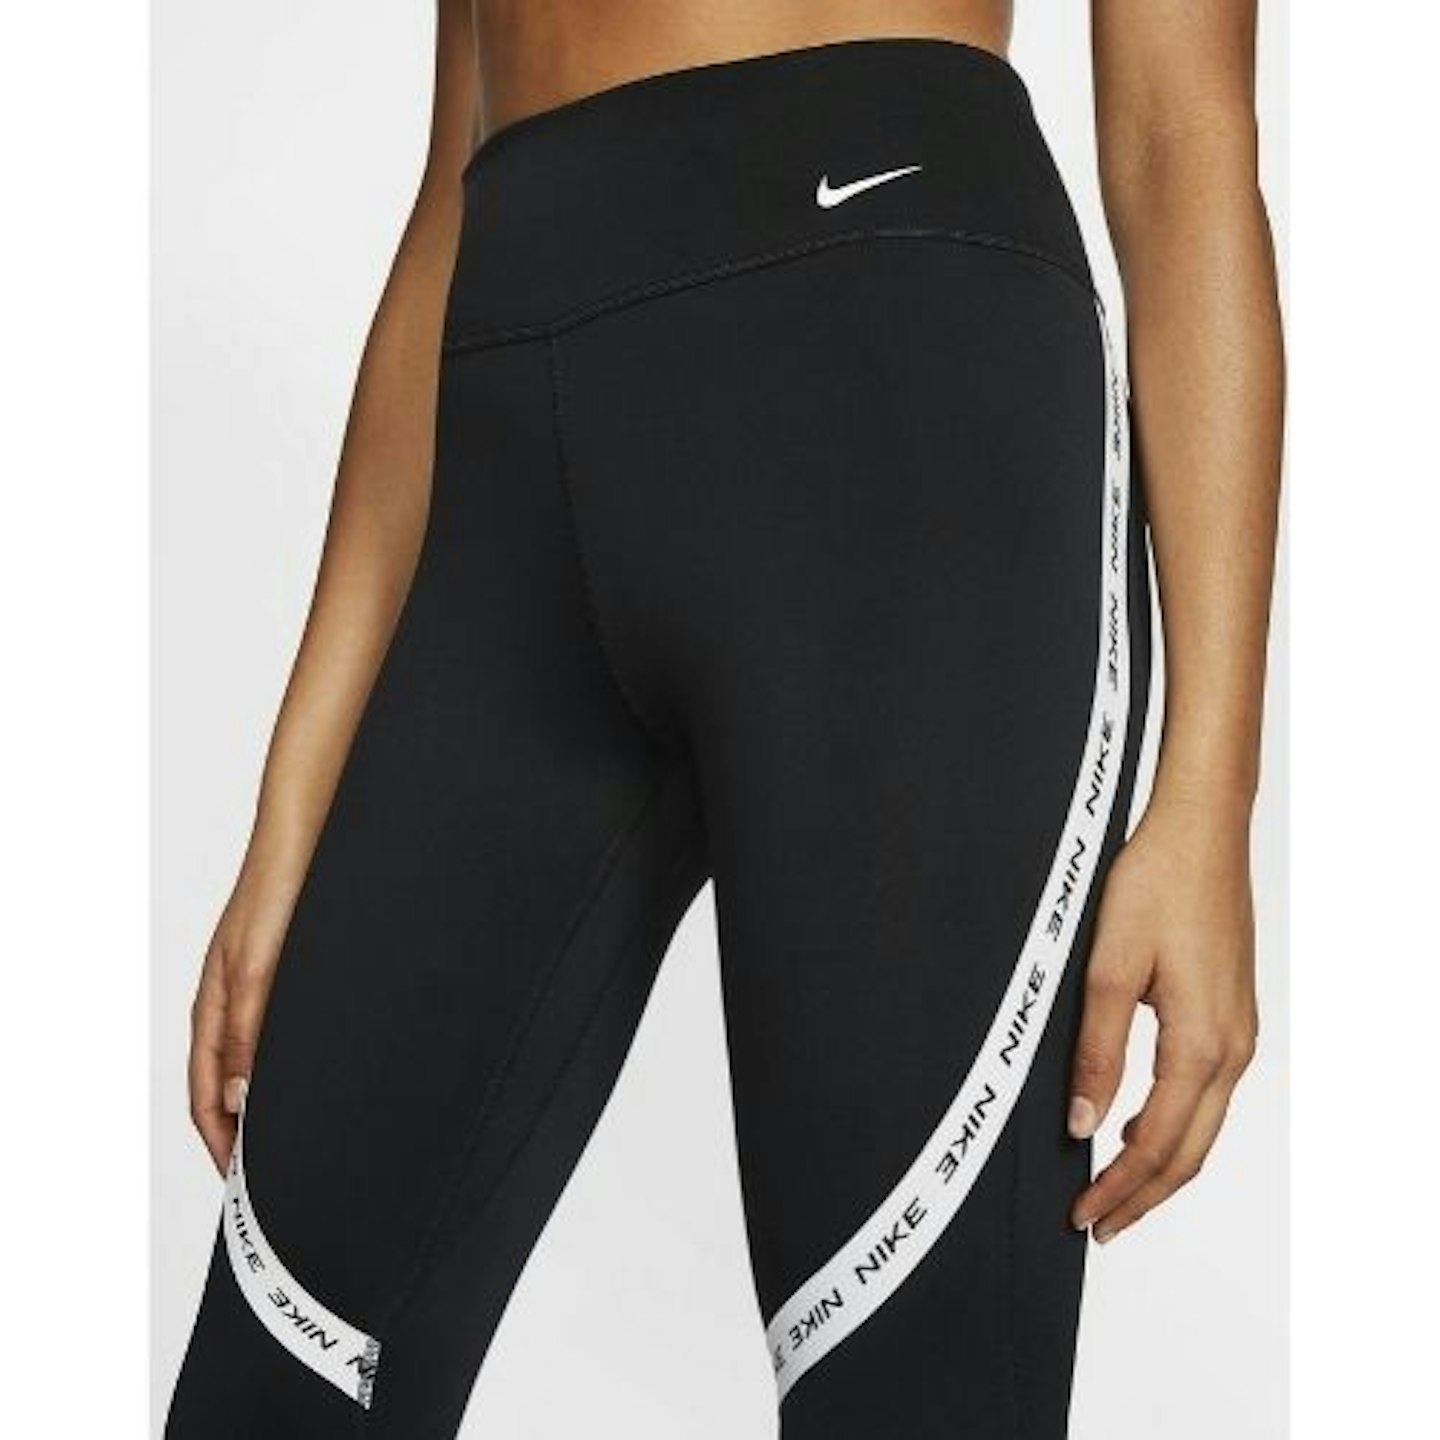 Women's Mid-Rise Crops Nike One